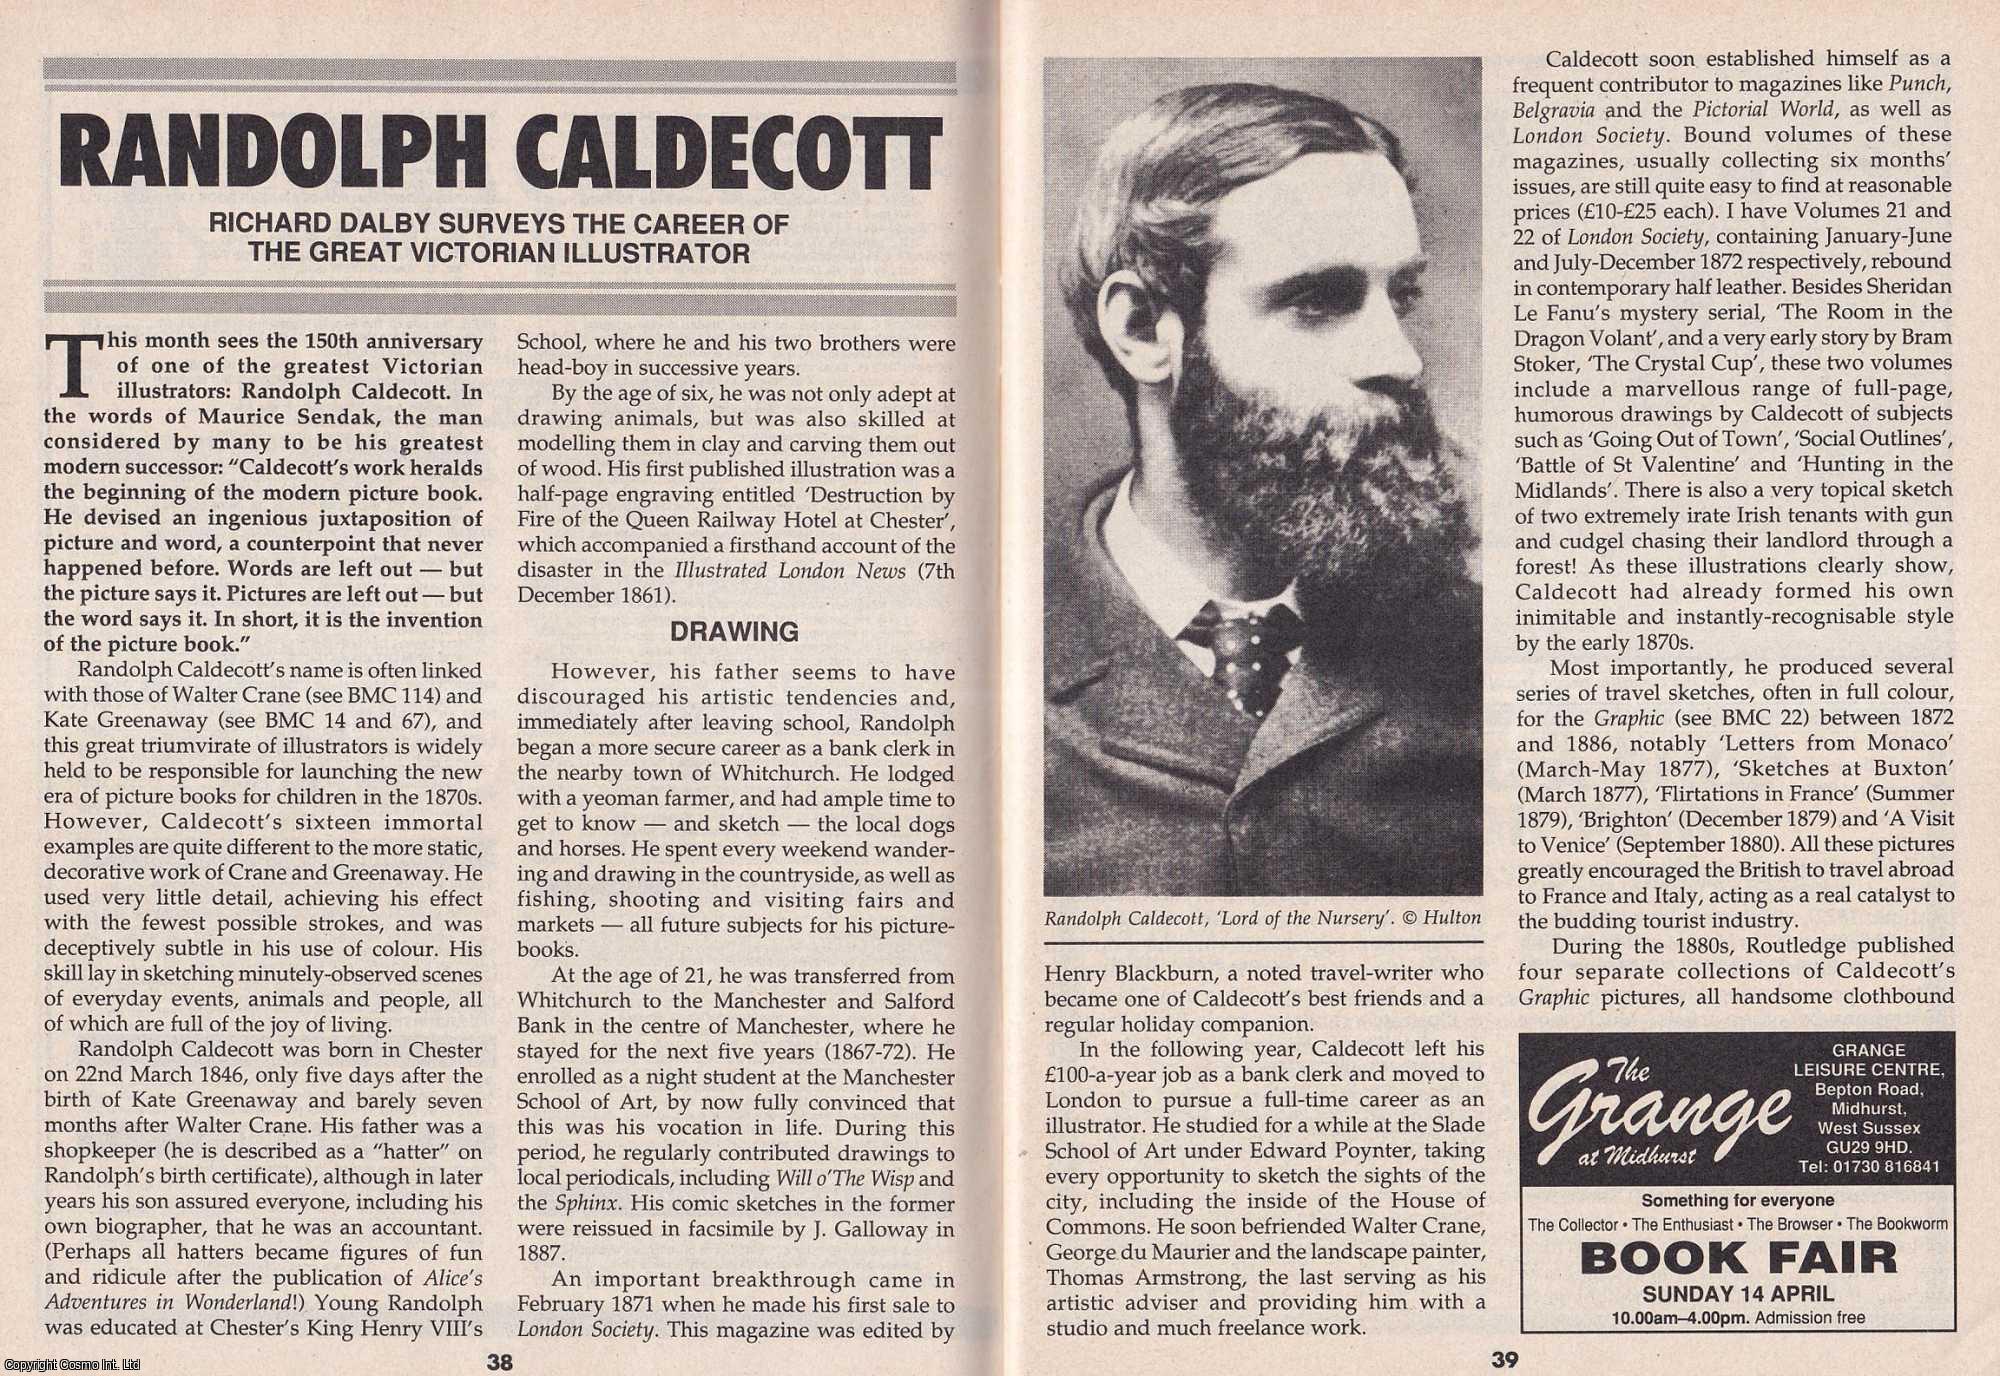 Richard Dalby - Randolph Caldecott : The Great Victorian Illustrator. This is an original article separated from an issue of The Book & Magazine Collector publication.